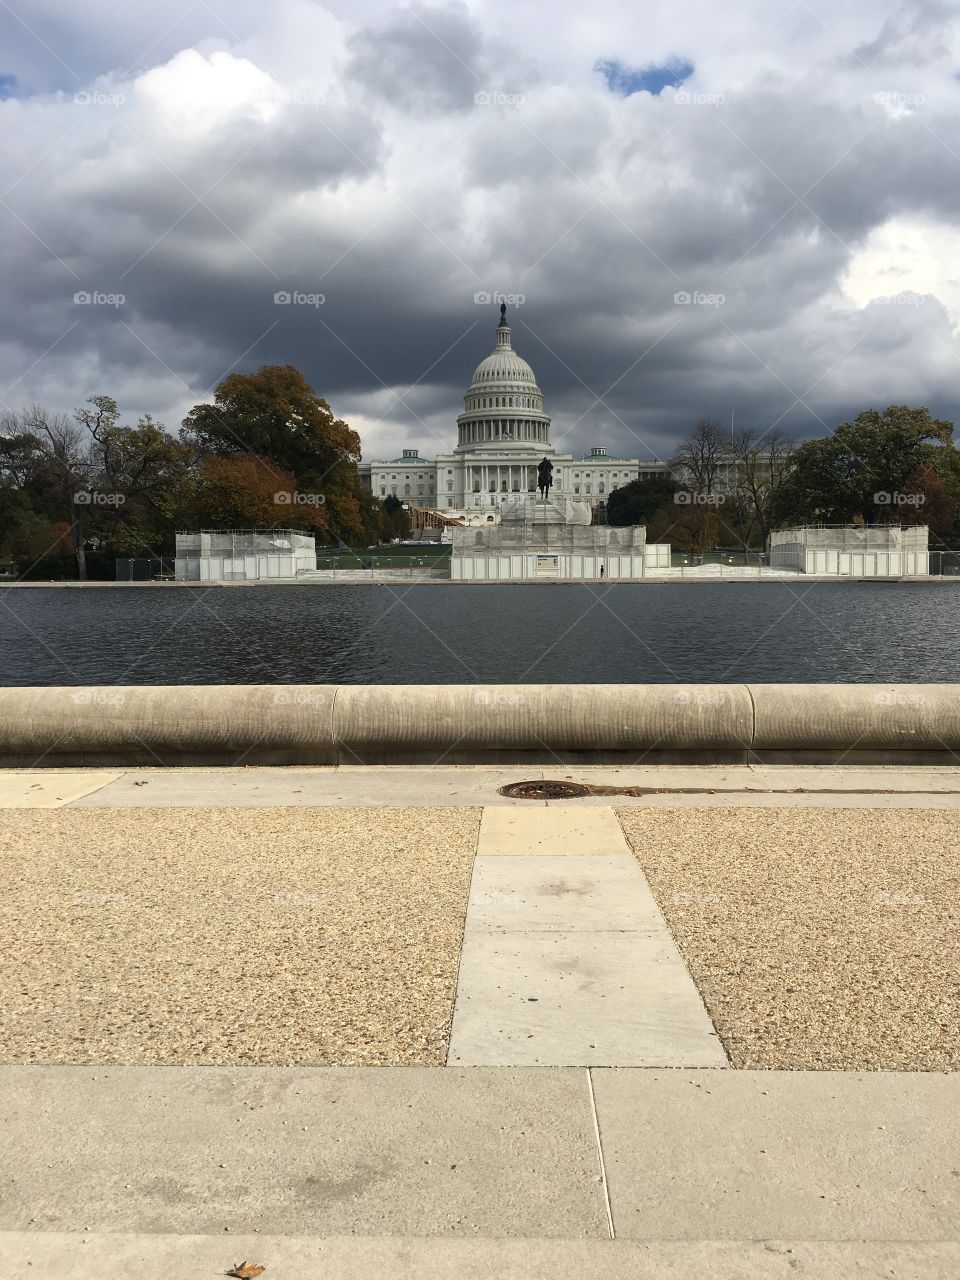 Storm clouds brew over the Capitol Building before rainfall in Washington D. C. the day after the election. Scaffolding and other construction in progress was for the inauguration yet to come.